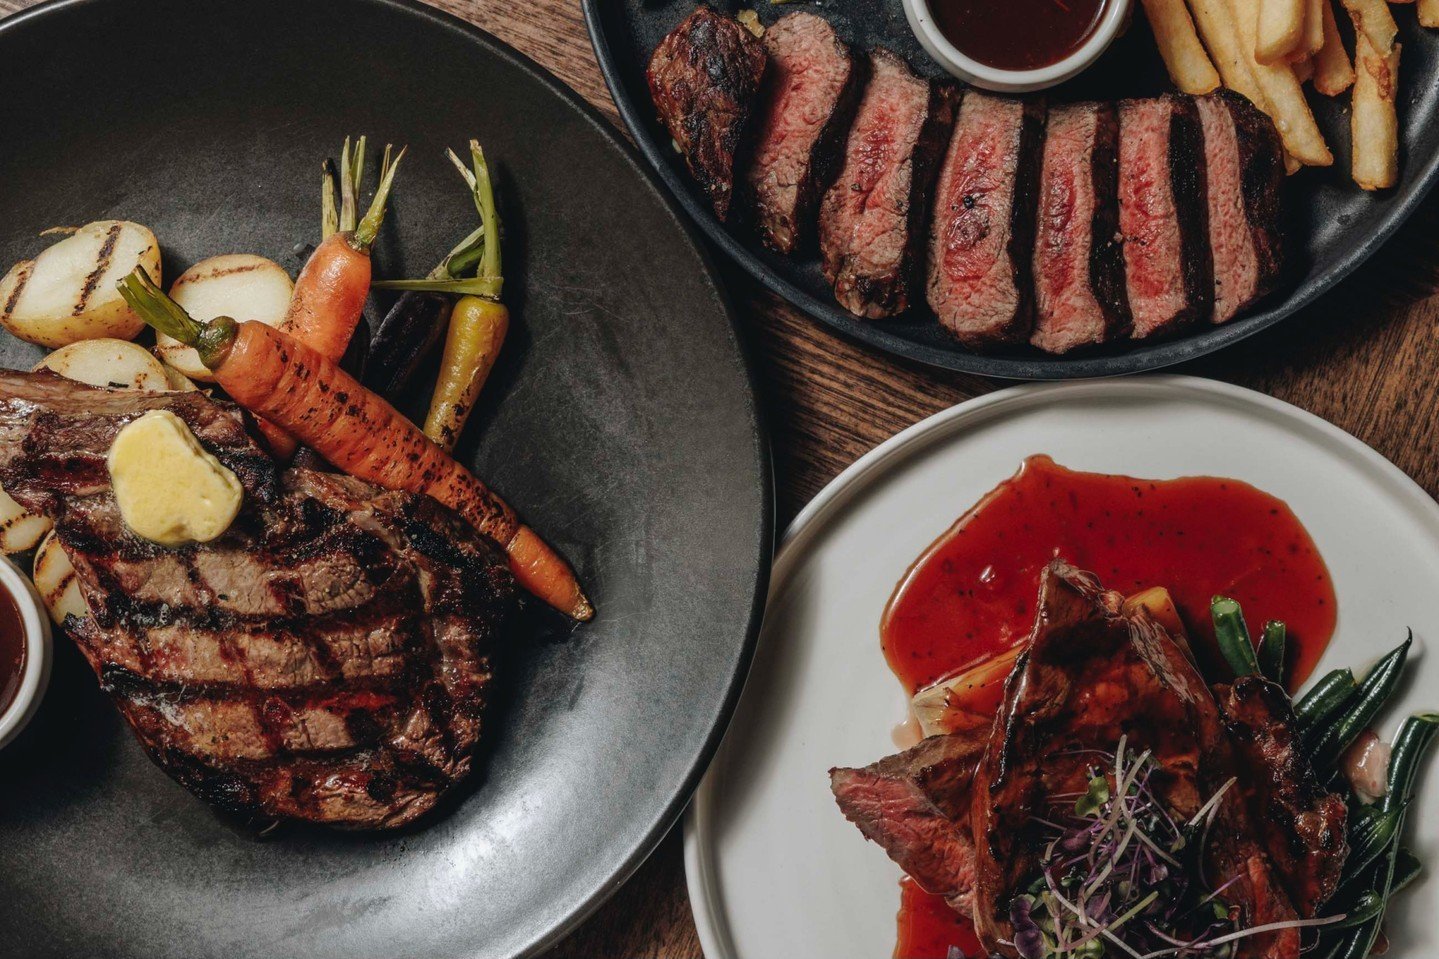 Cold weather getting you down? There's nothing like a perfectly grilled steak to lift your spirits.

Every Monday our Chefs are serving an off the menu premium cut for just $29! 

Book your table for tonight on our website.

#ChefsCut #NextLevelPubFo